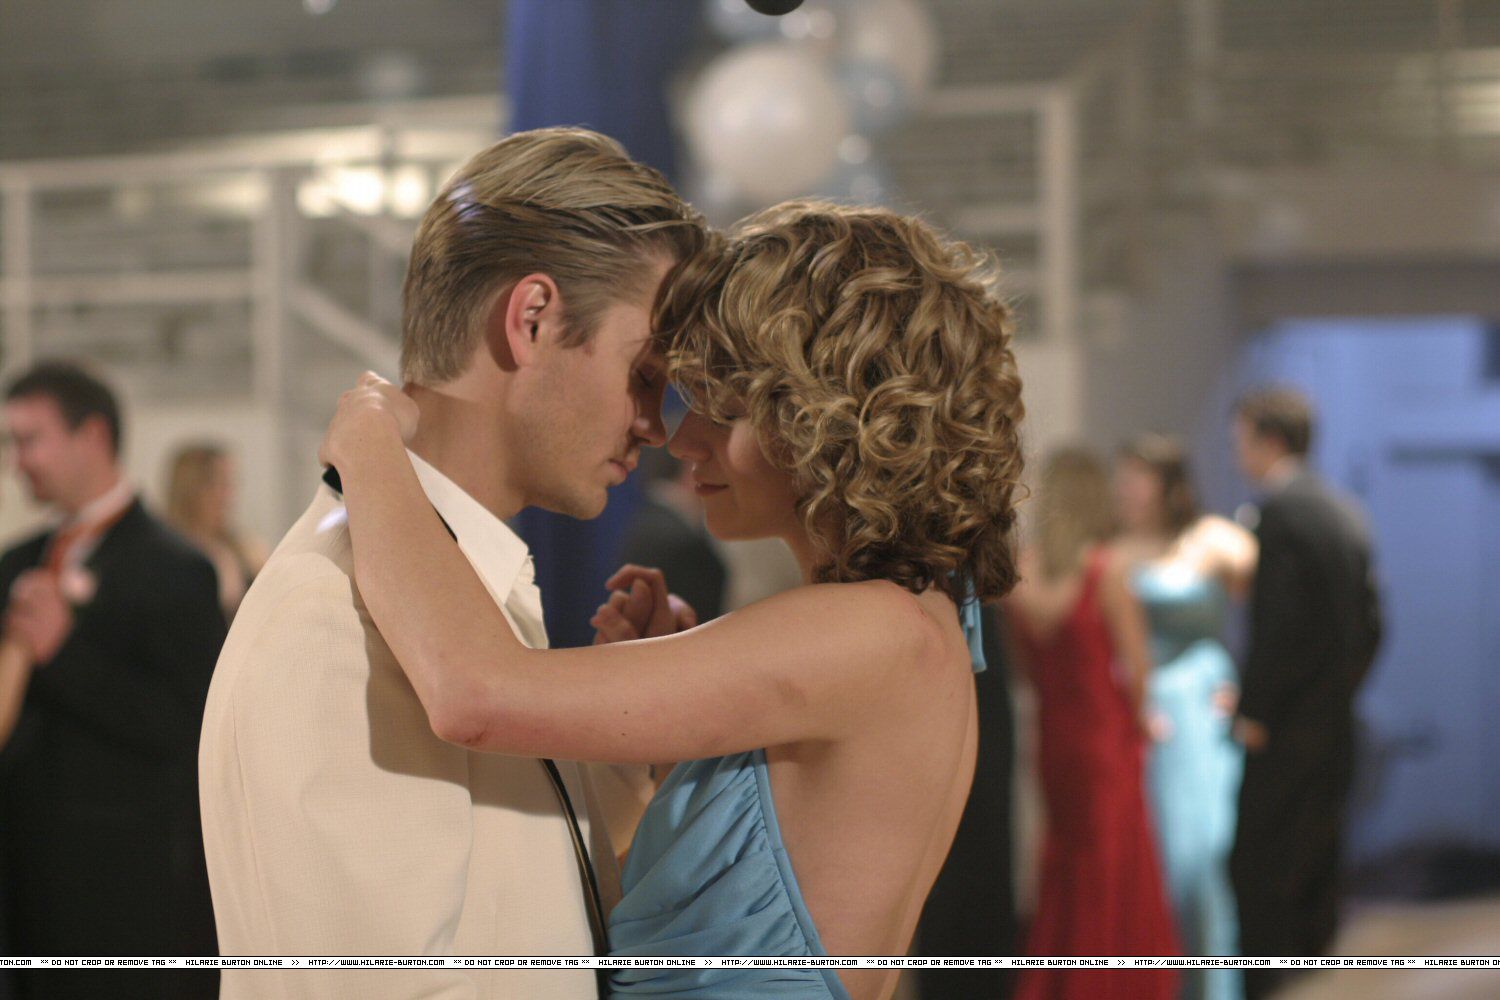 http://images.fanpop.com/images/image_uploads/lucas-and-peyton-one-tree-hill-56277_1500_1000.jpg